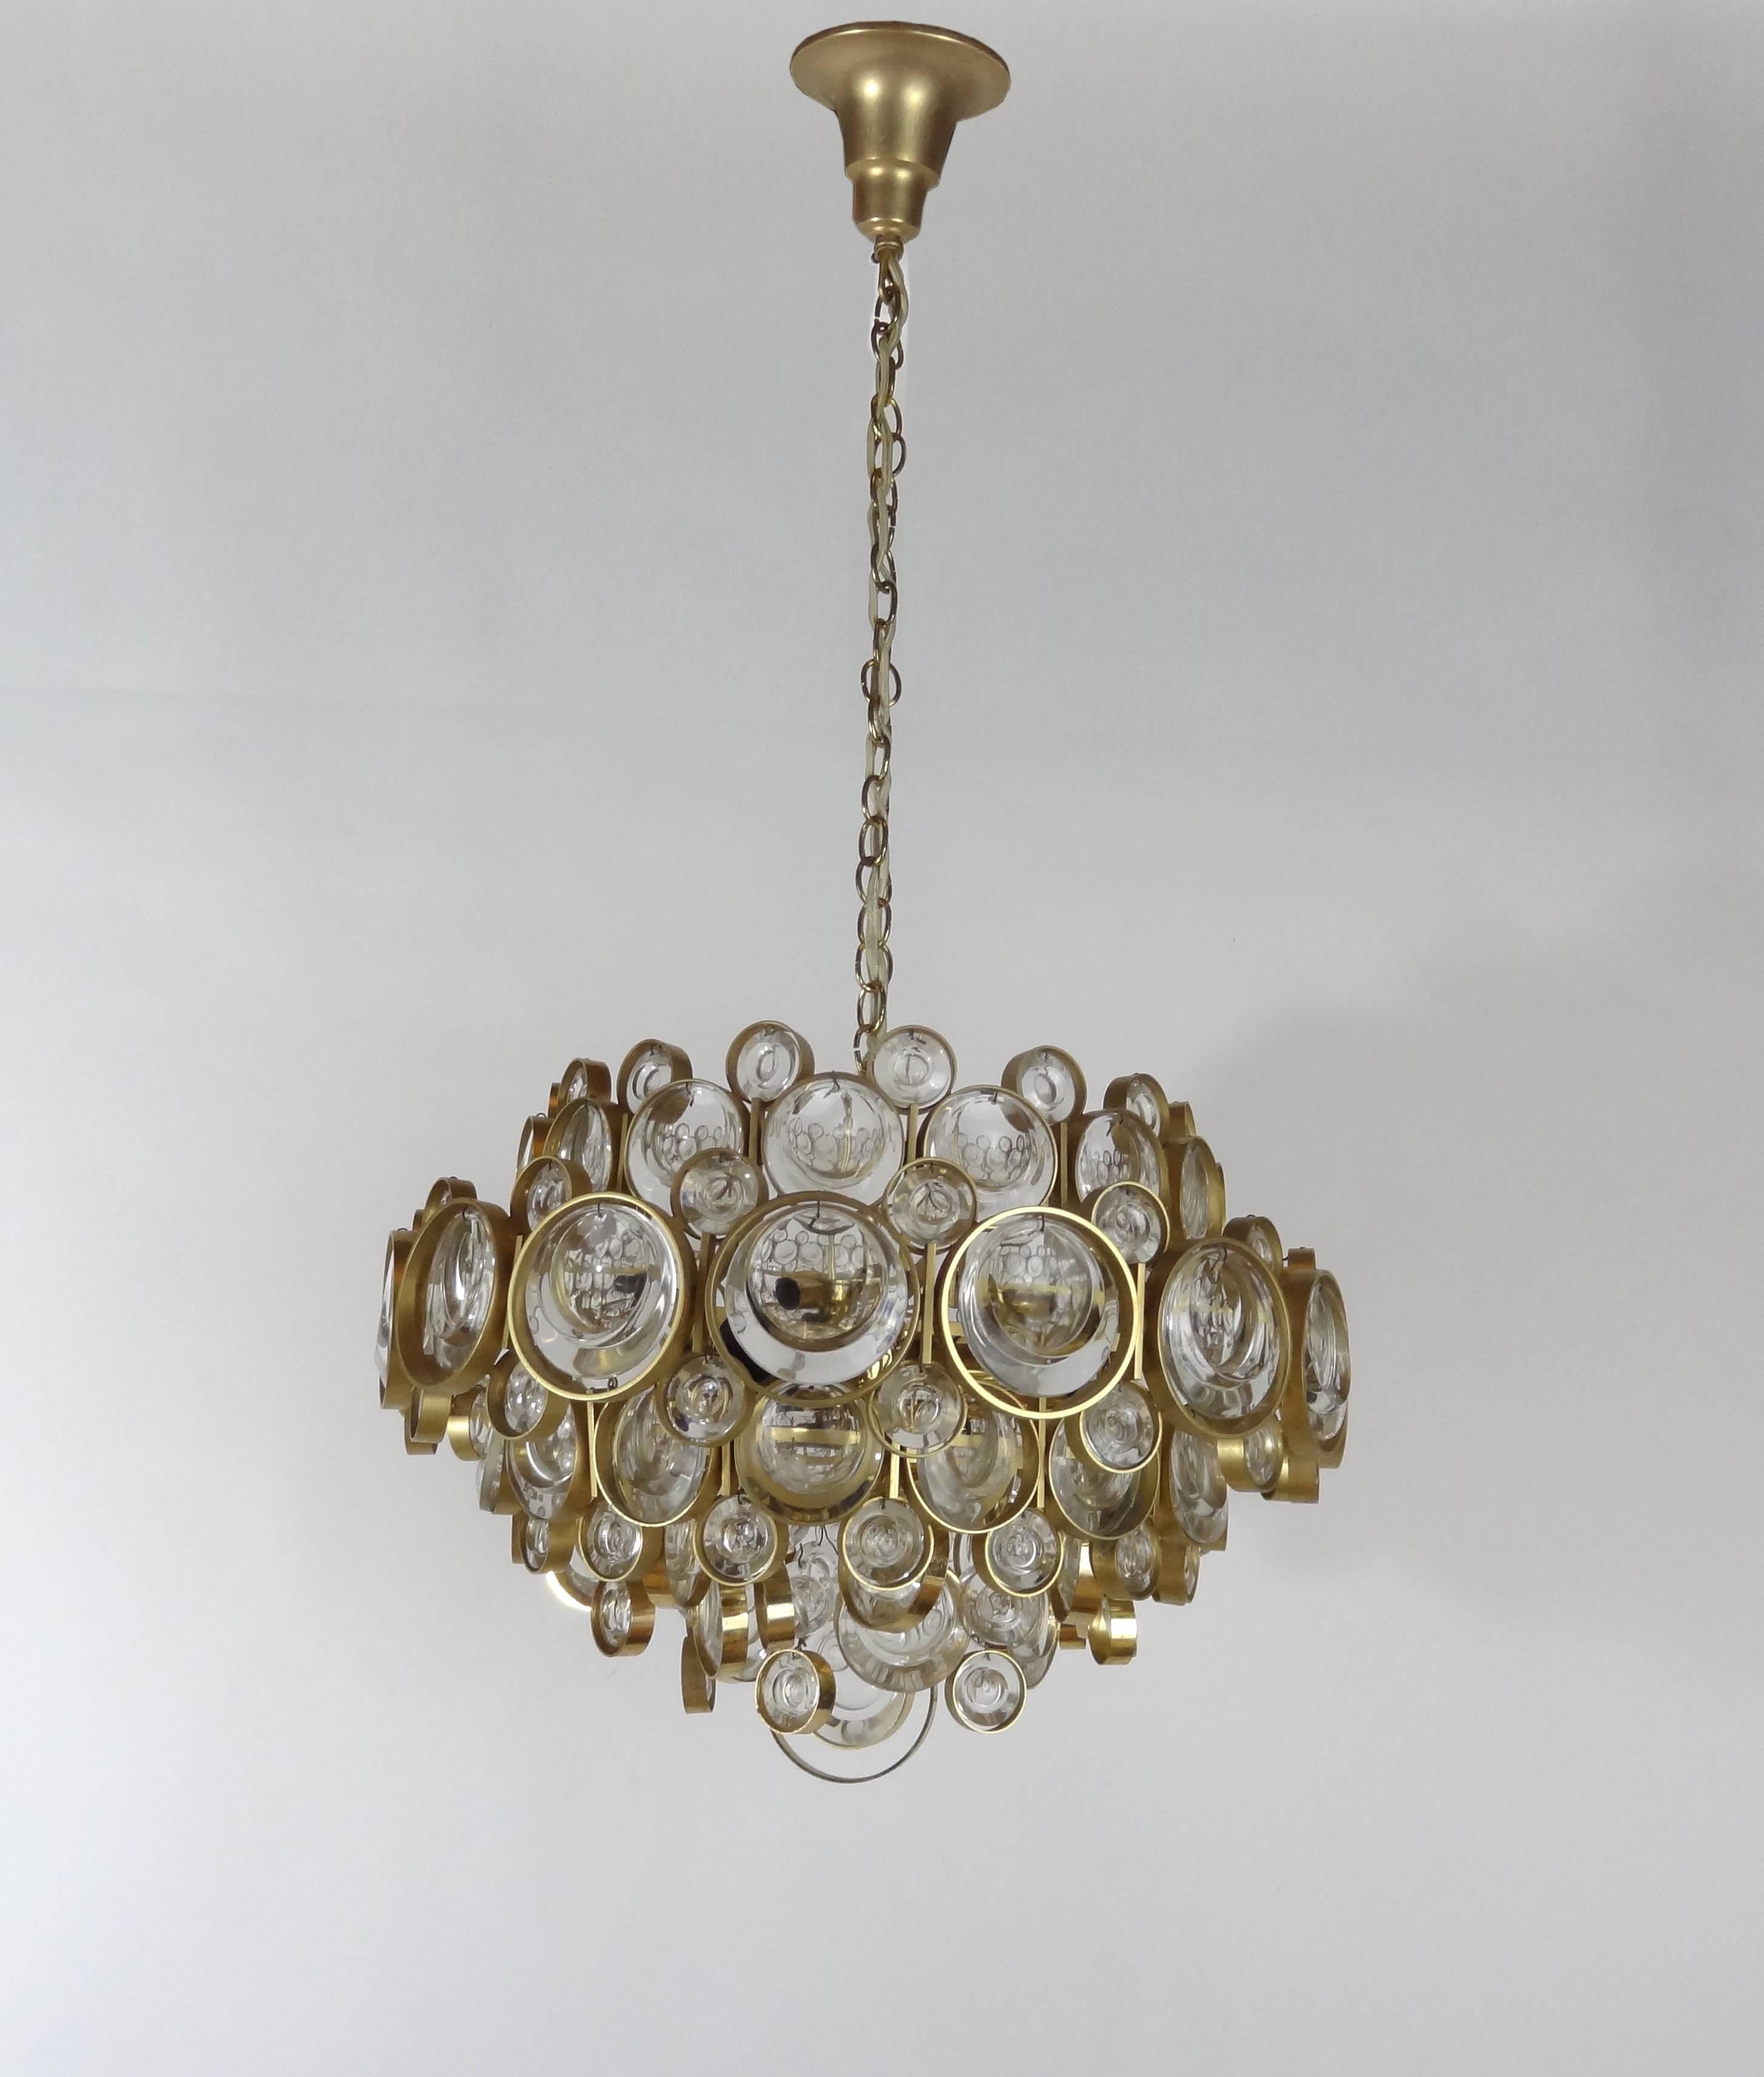 A gilt brass chandelier with multiple rings with glass by Palwa.

German, Circa 1960's
